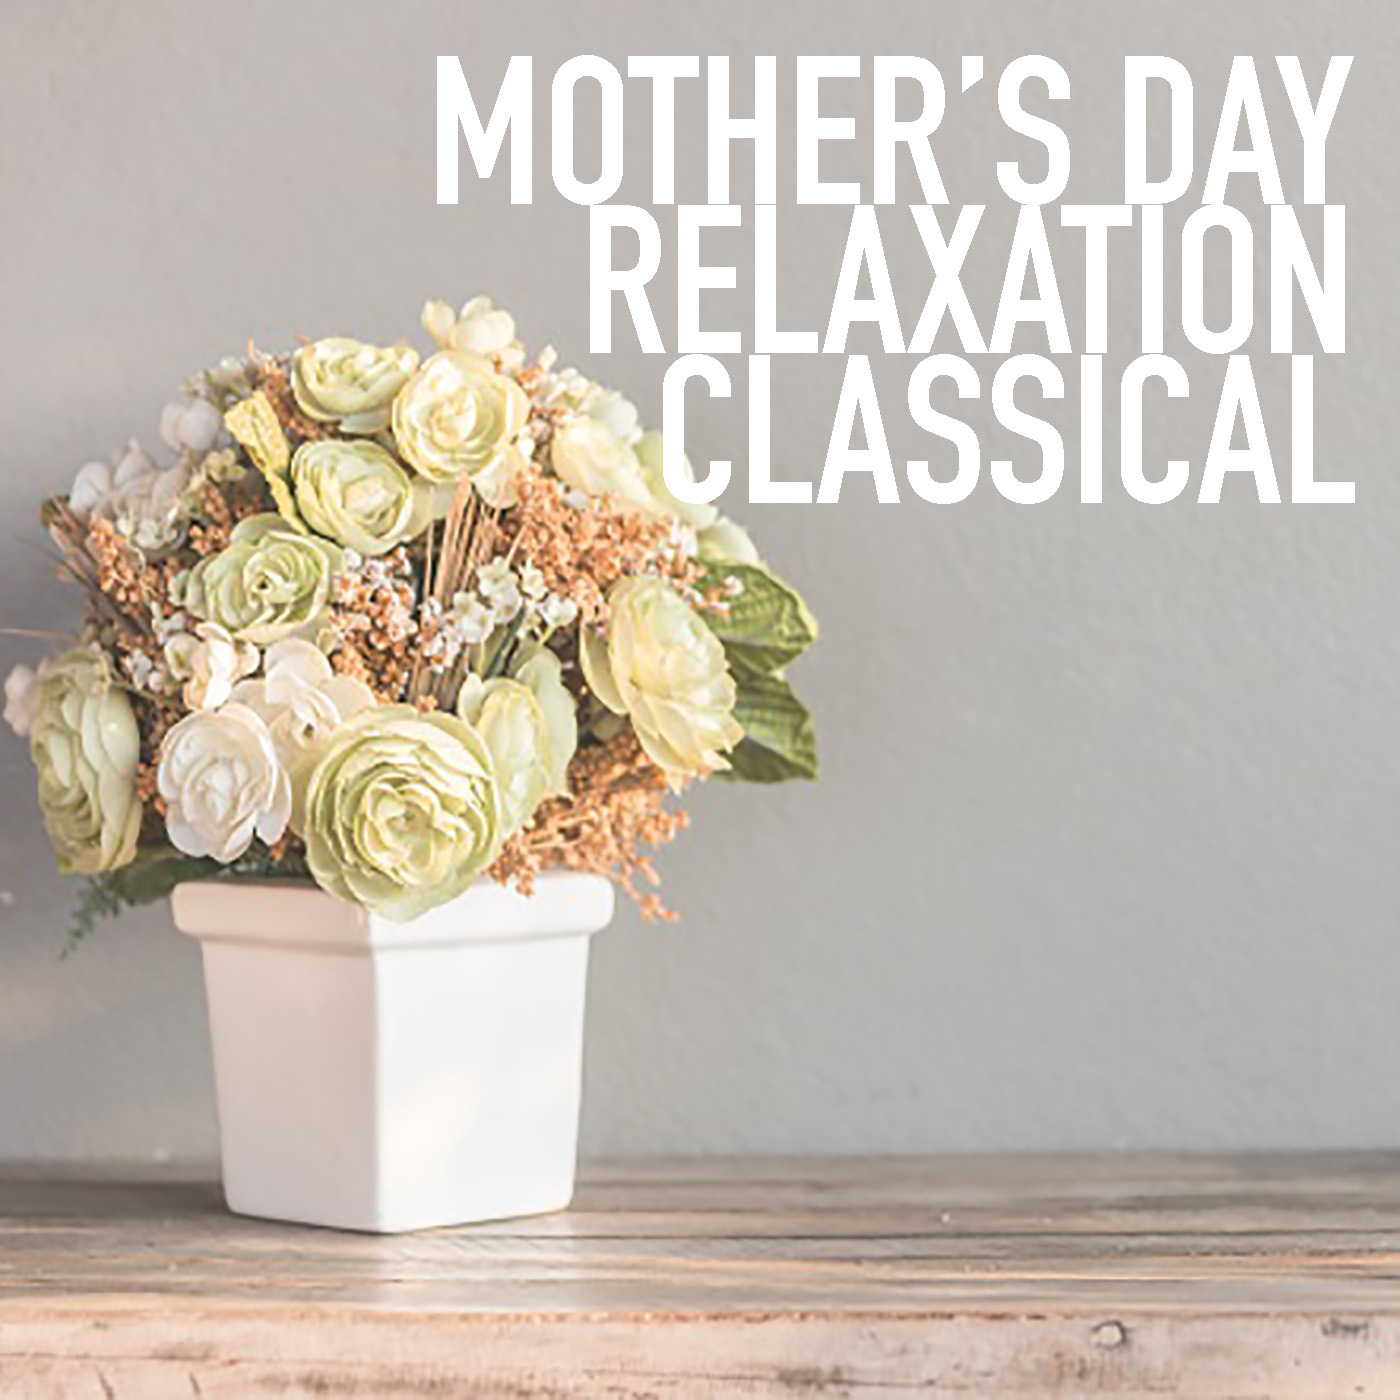 Mother's Day Relaxation Classical